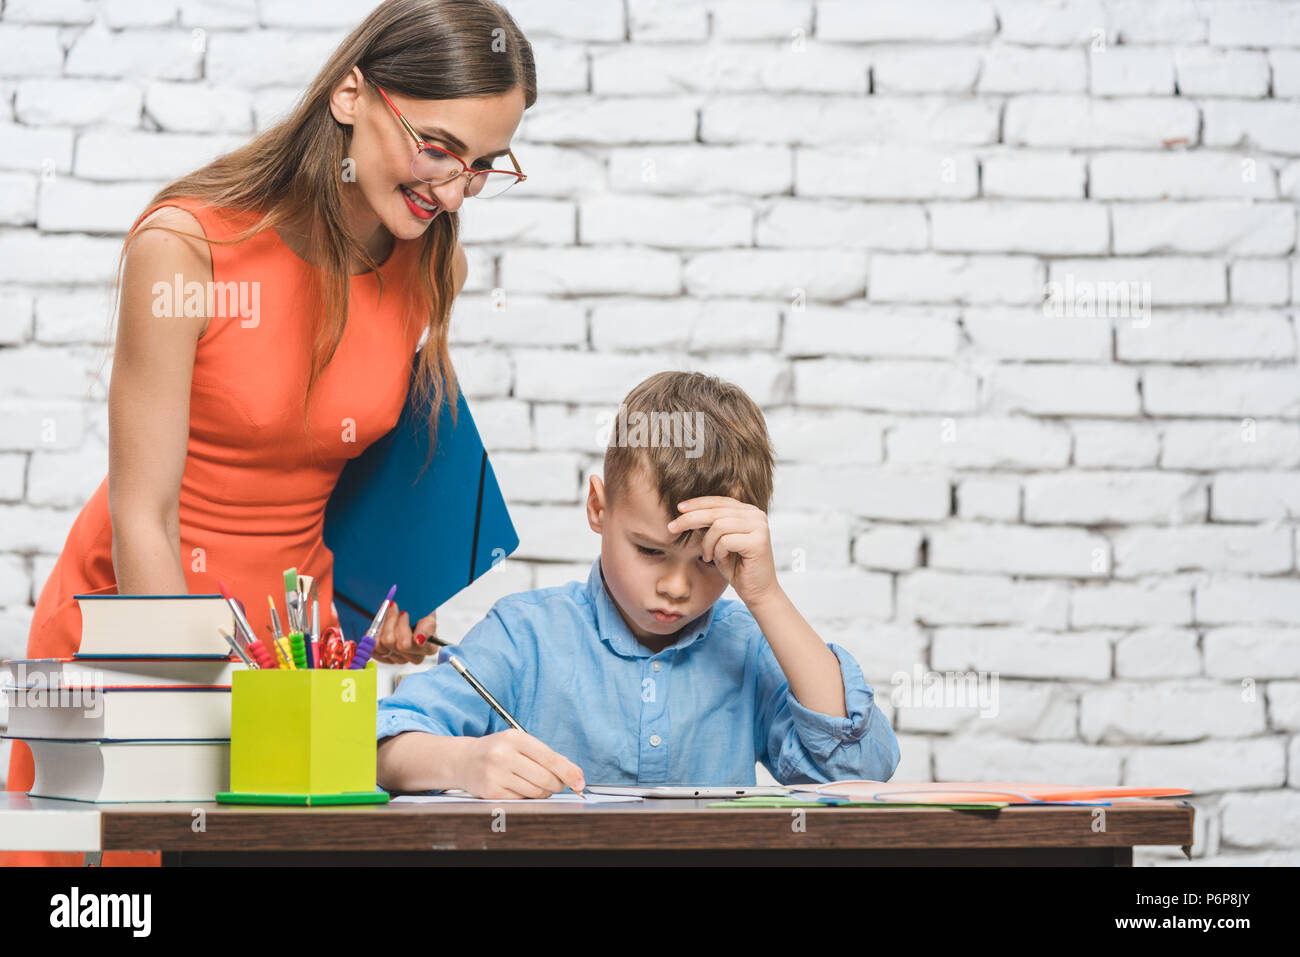 Student boy doing work in school supervised by his teacher Stock Photo